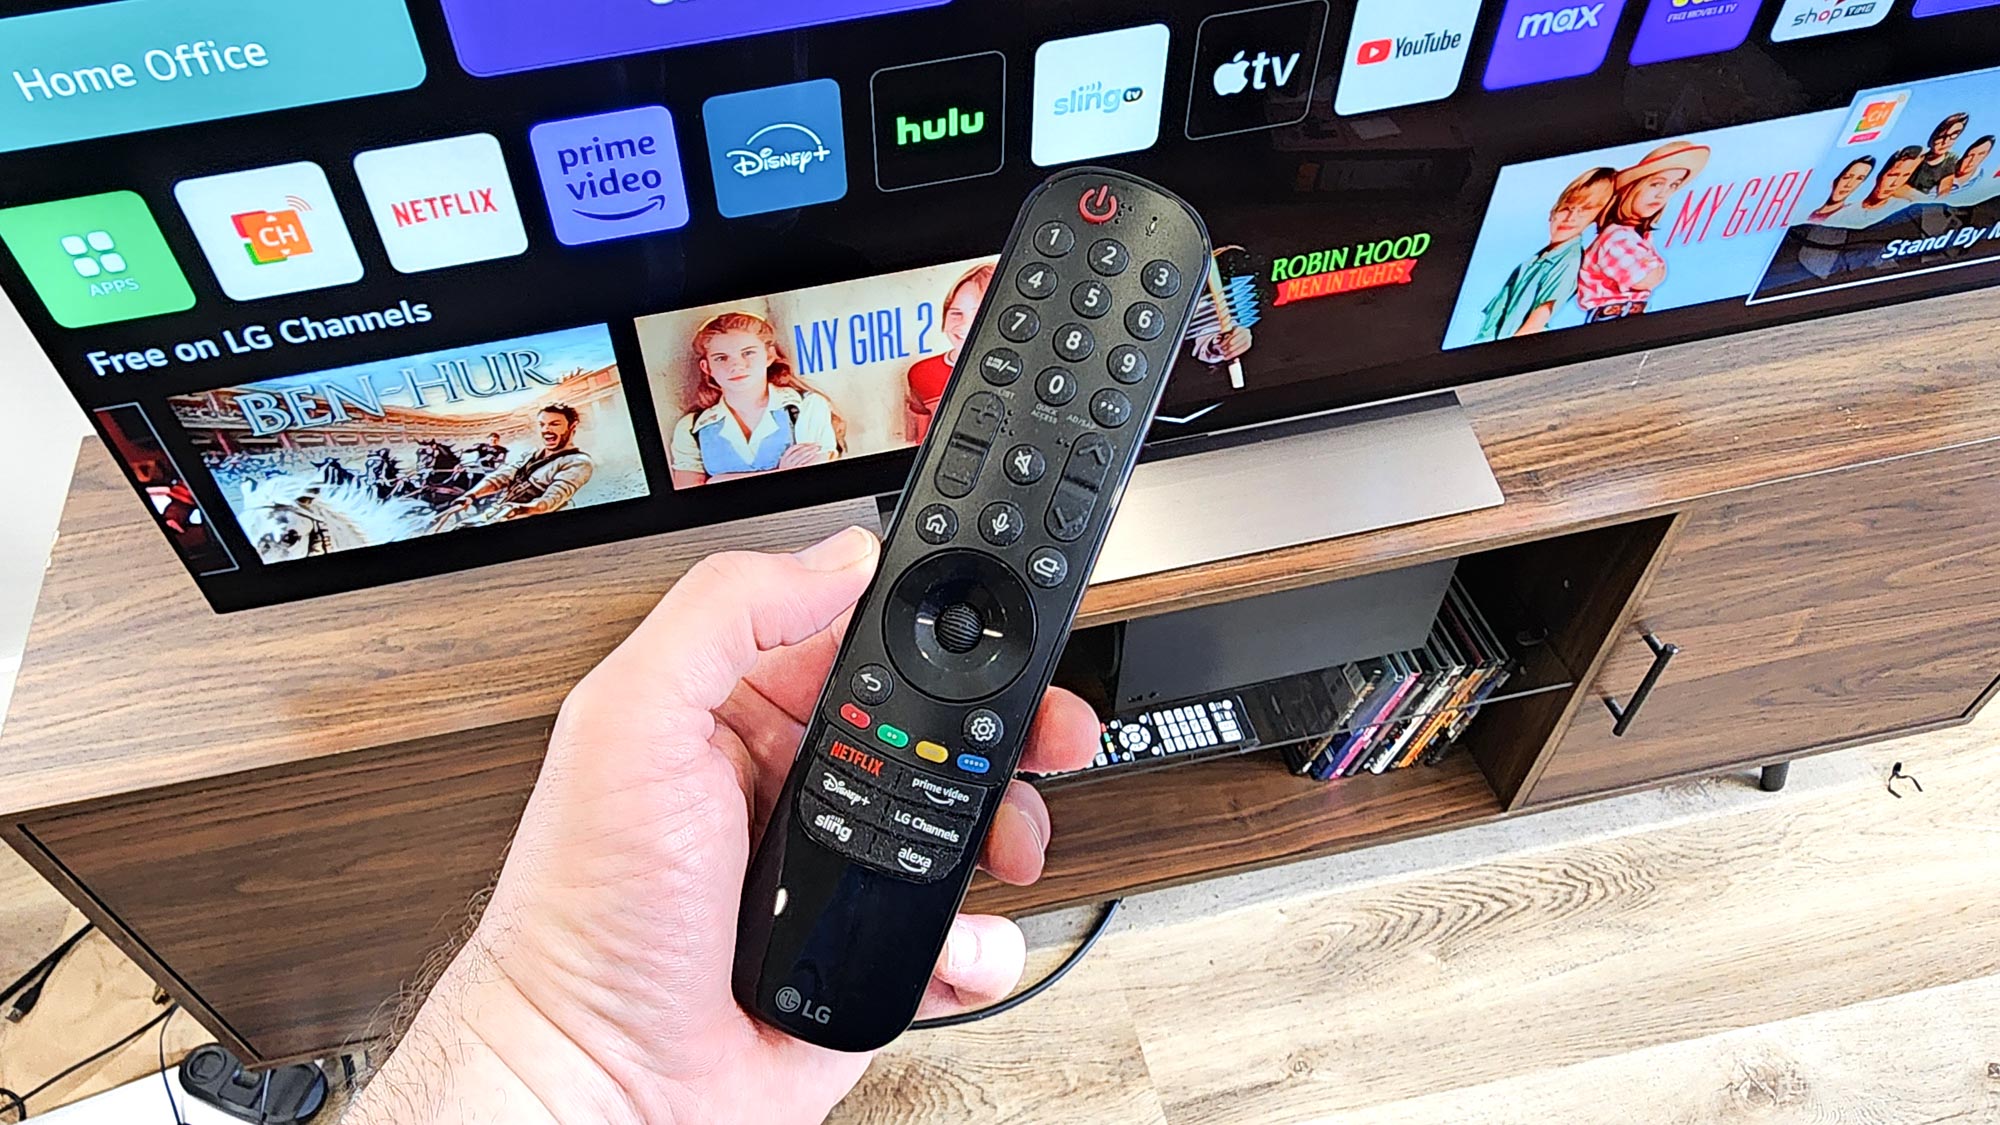 LG C4 OLED TV remote shown in a living room